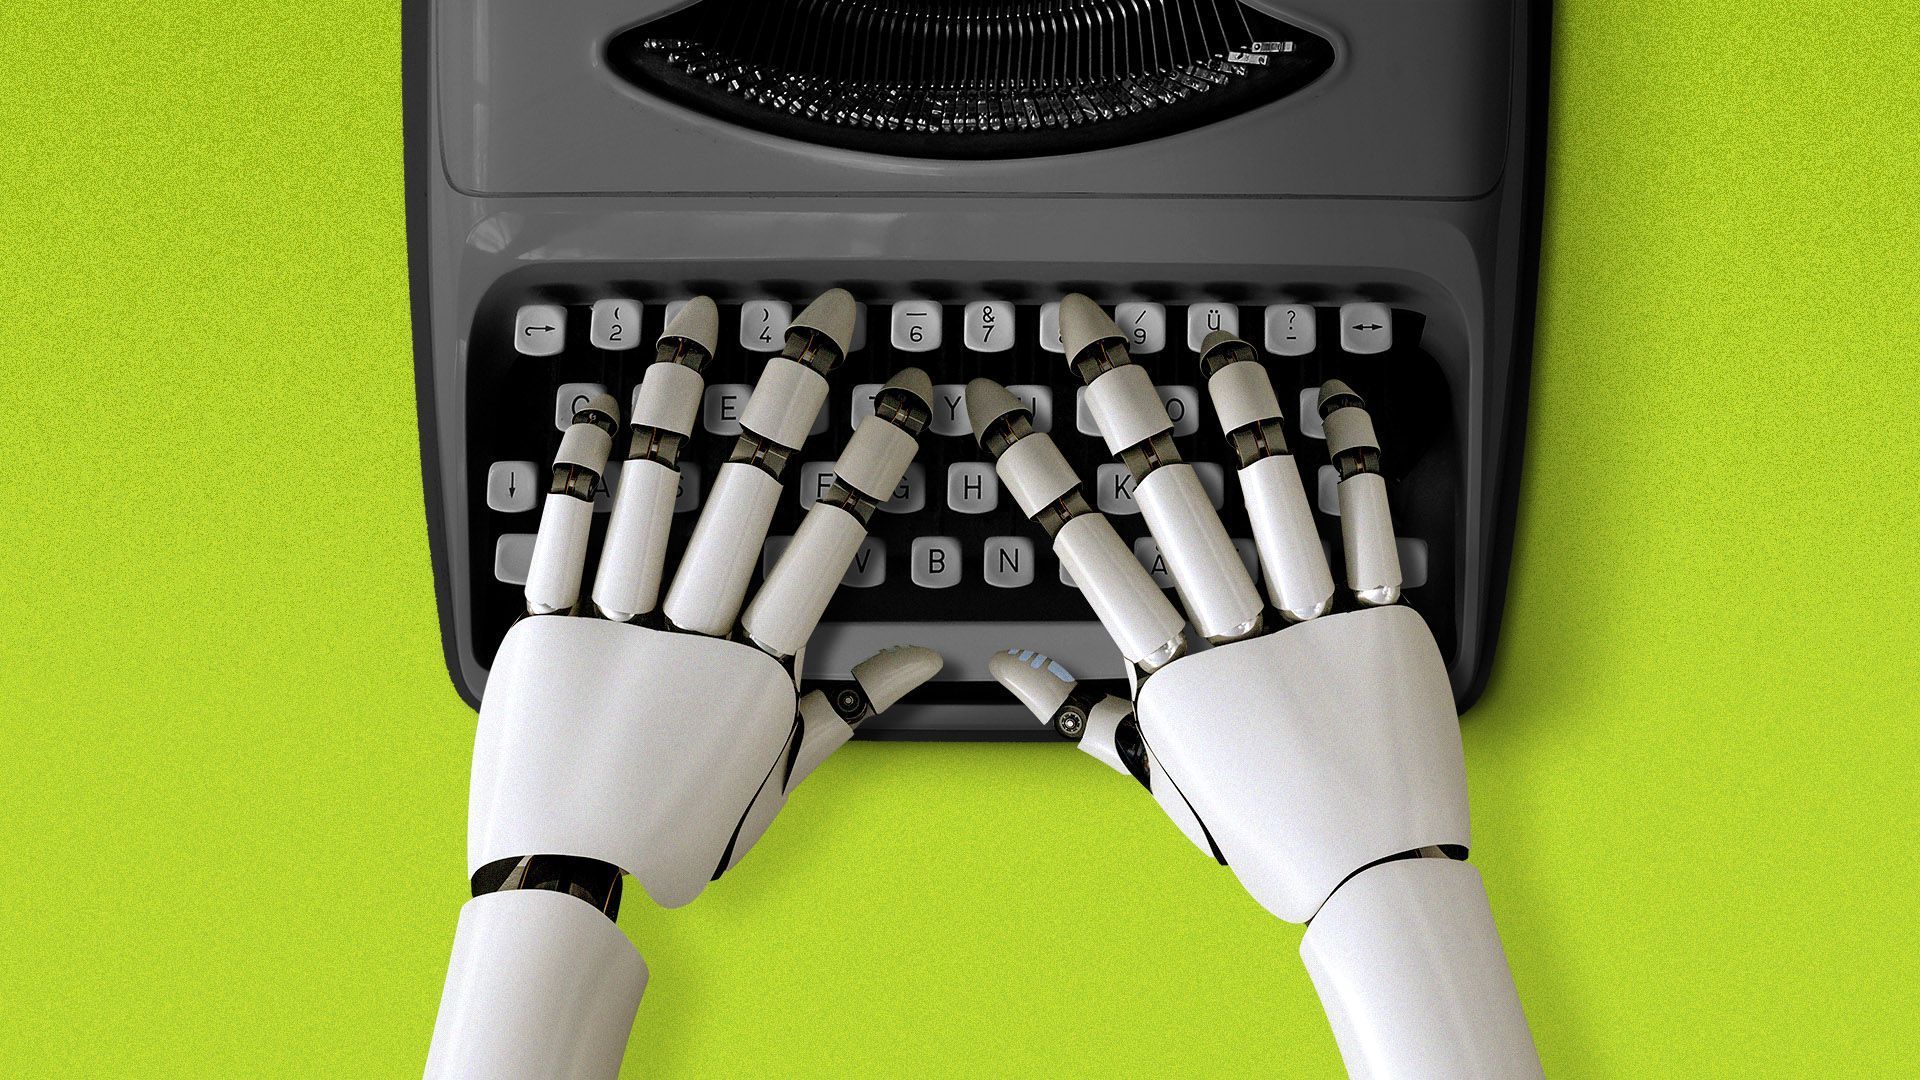 Robot hands typing on a typewriter resting on a green table.